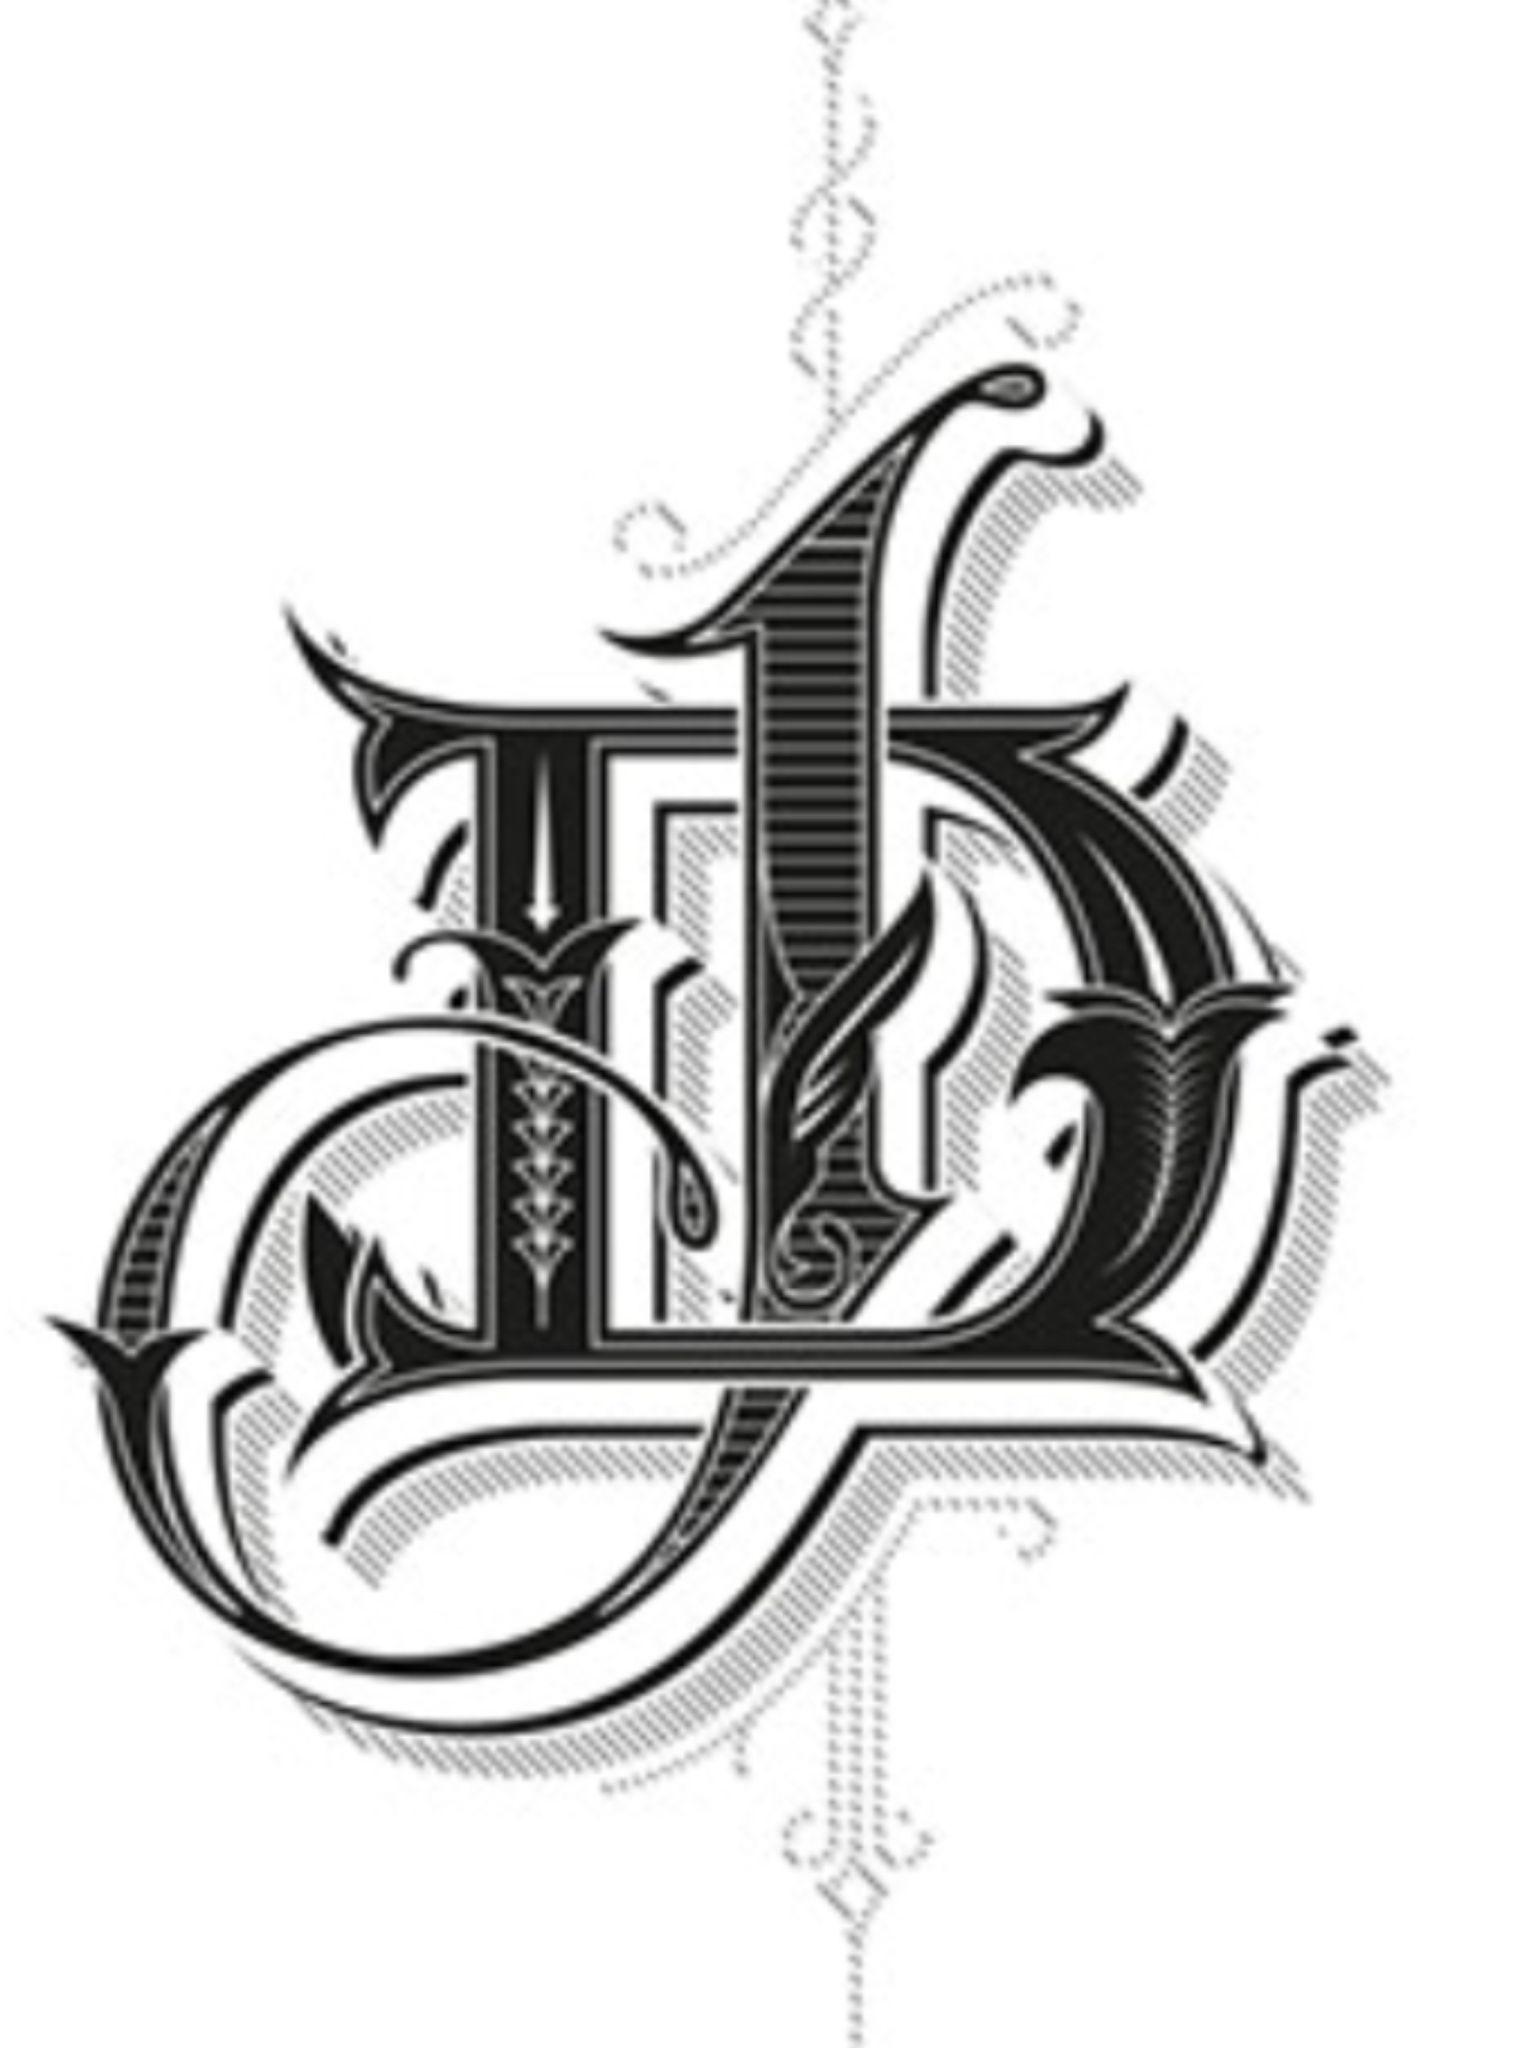 JD Logo - JP. Typography, Lettering and Logos